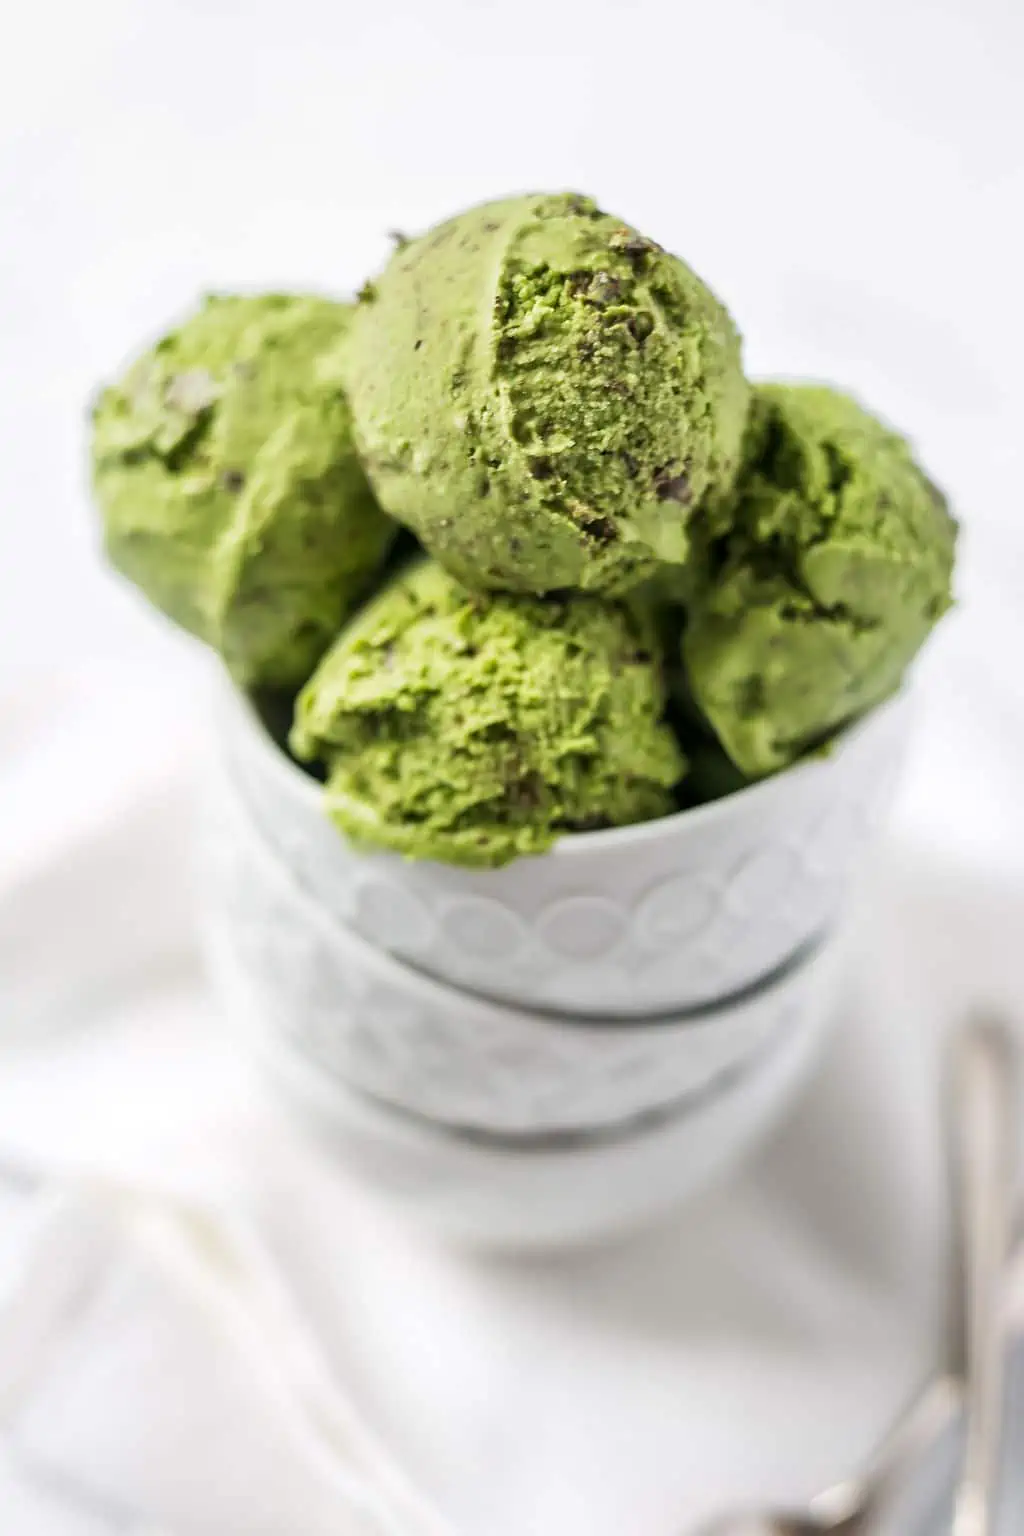 Several scoops of this Matcha Chip Plant Based Ice Cream Recipe in a bowl.